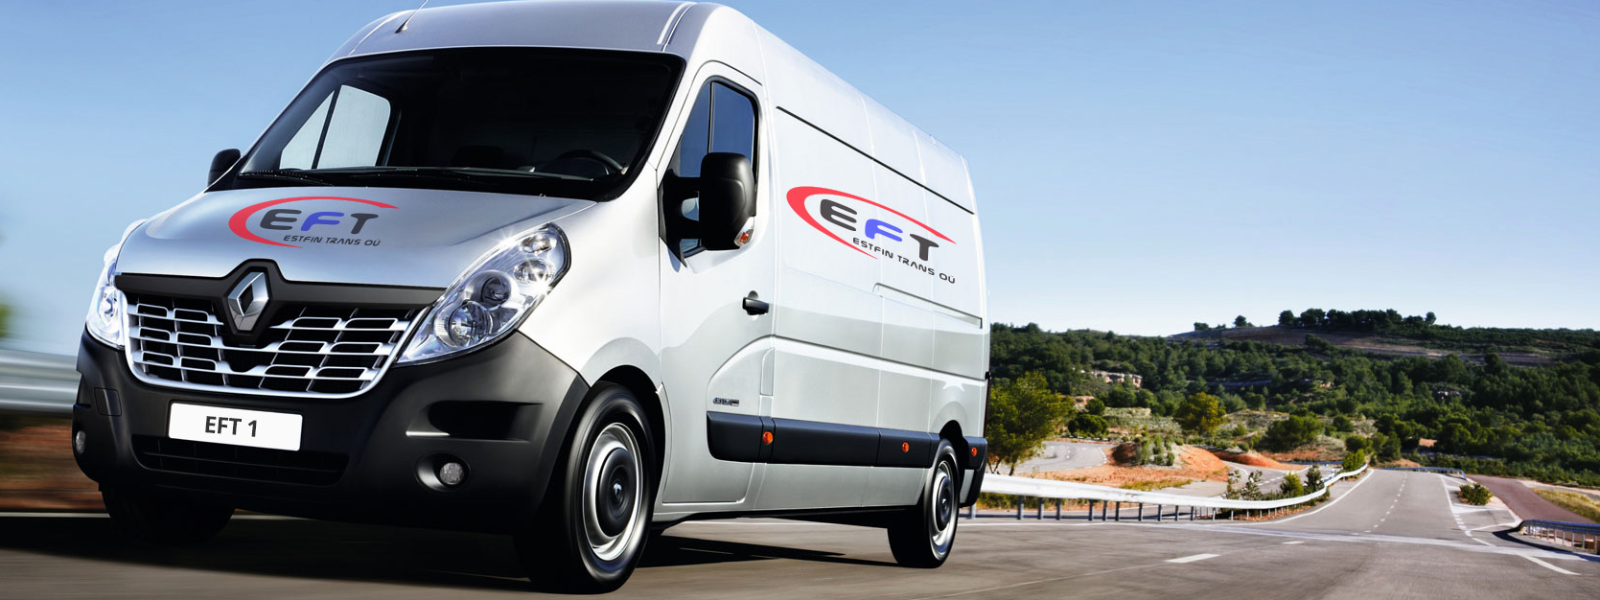 ESTFIN TRANS OÜ - transport and courier services, means of transport, means of handling, carriage of parcel vehicles acro...